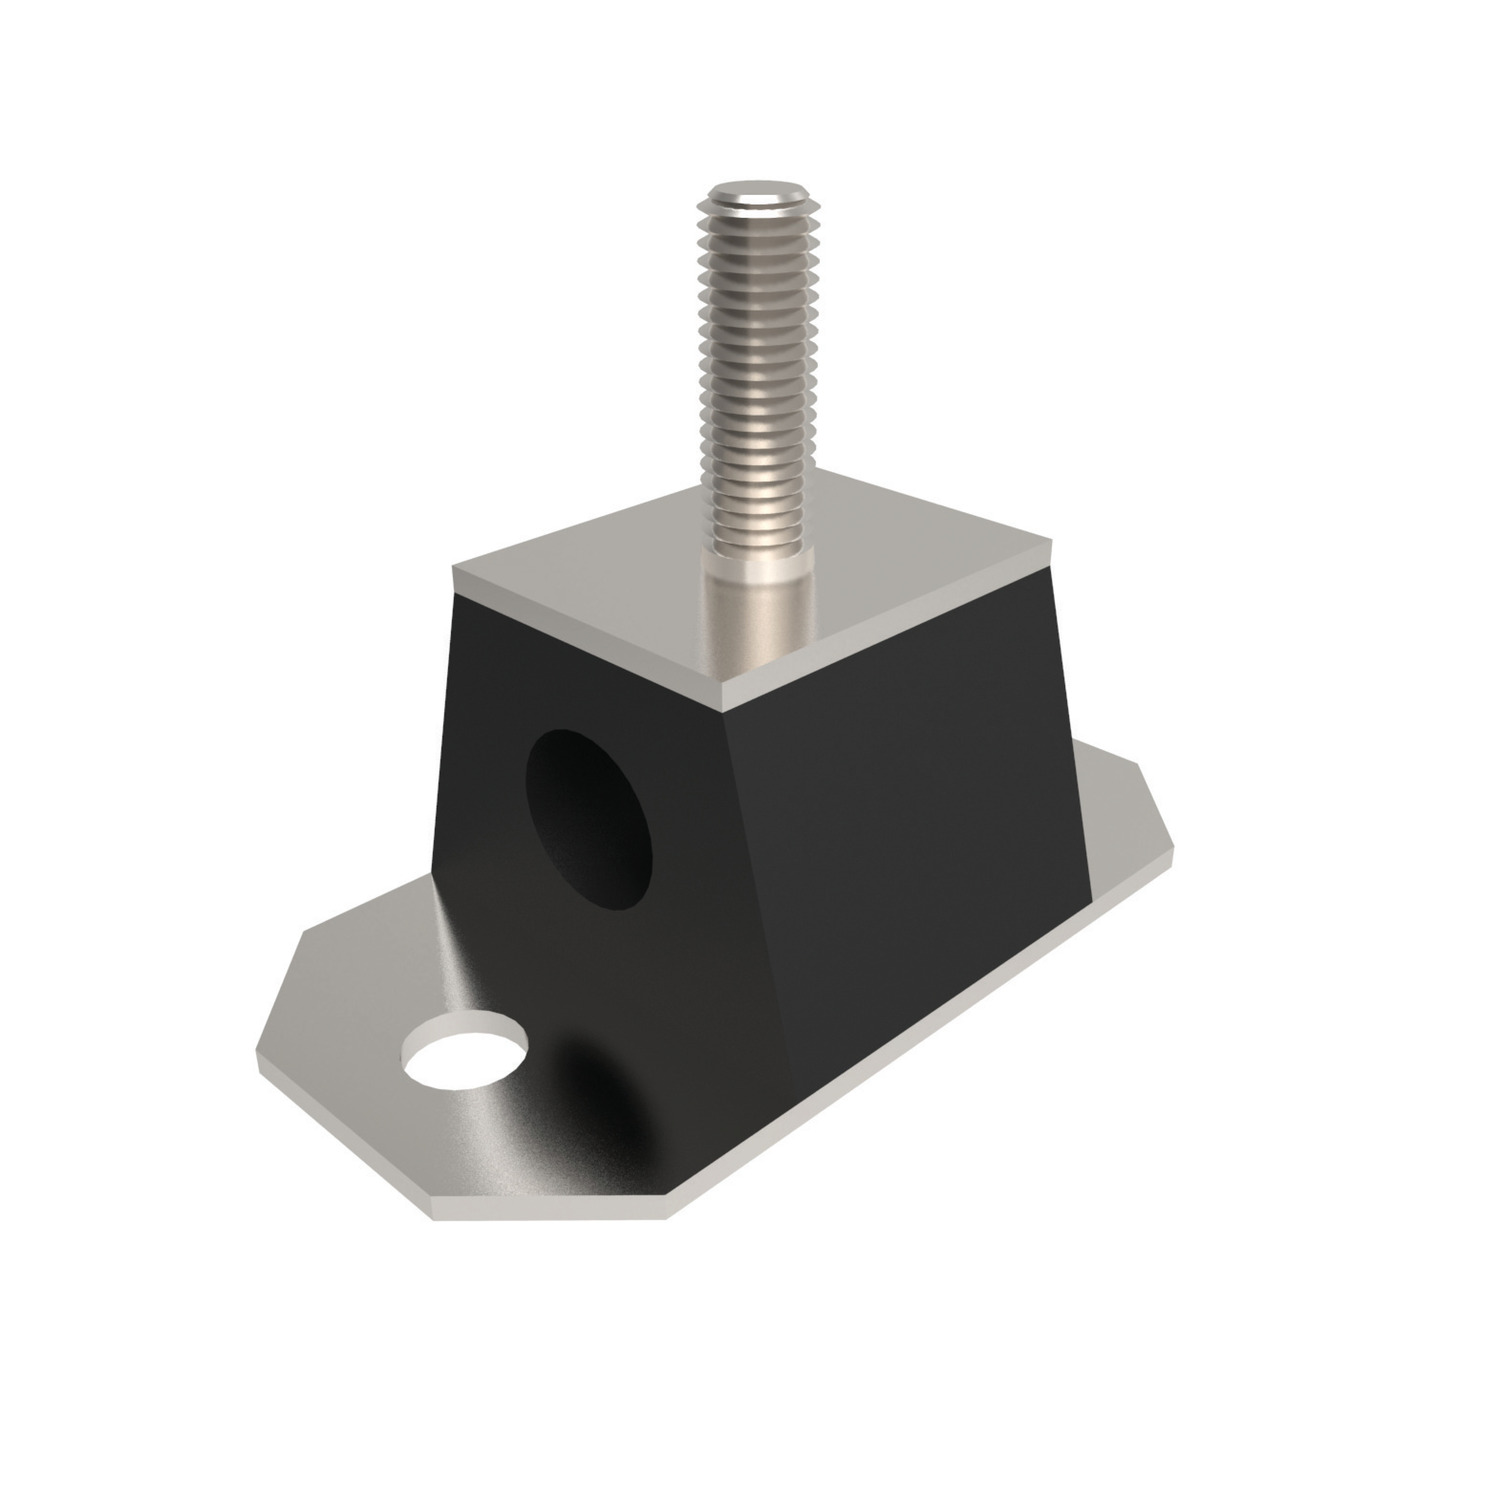 Anti-vibration Mounts Rectangular anti-vibration mounts. Used where good deflection properties are needed and for isolating of frequencies higher than 10Hz.